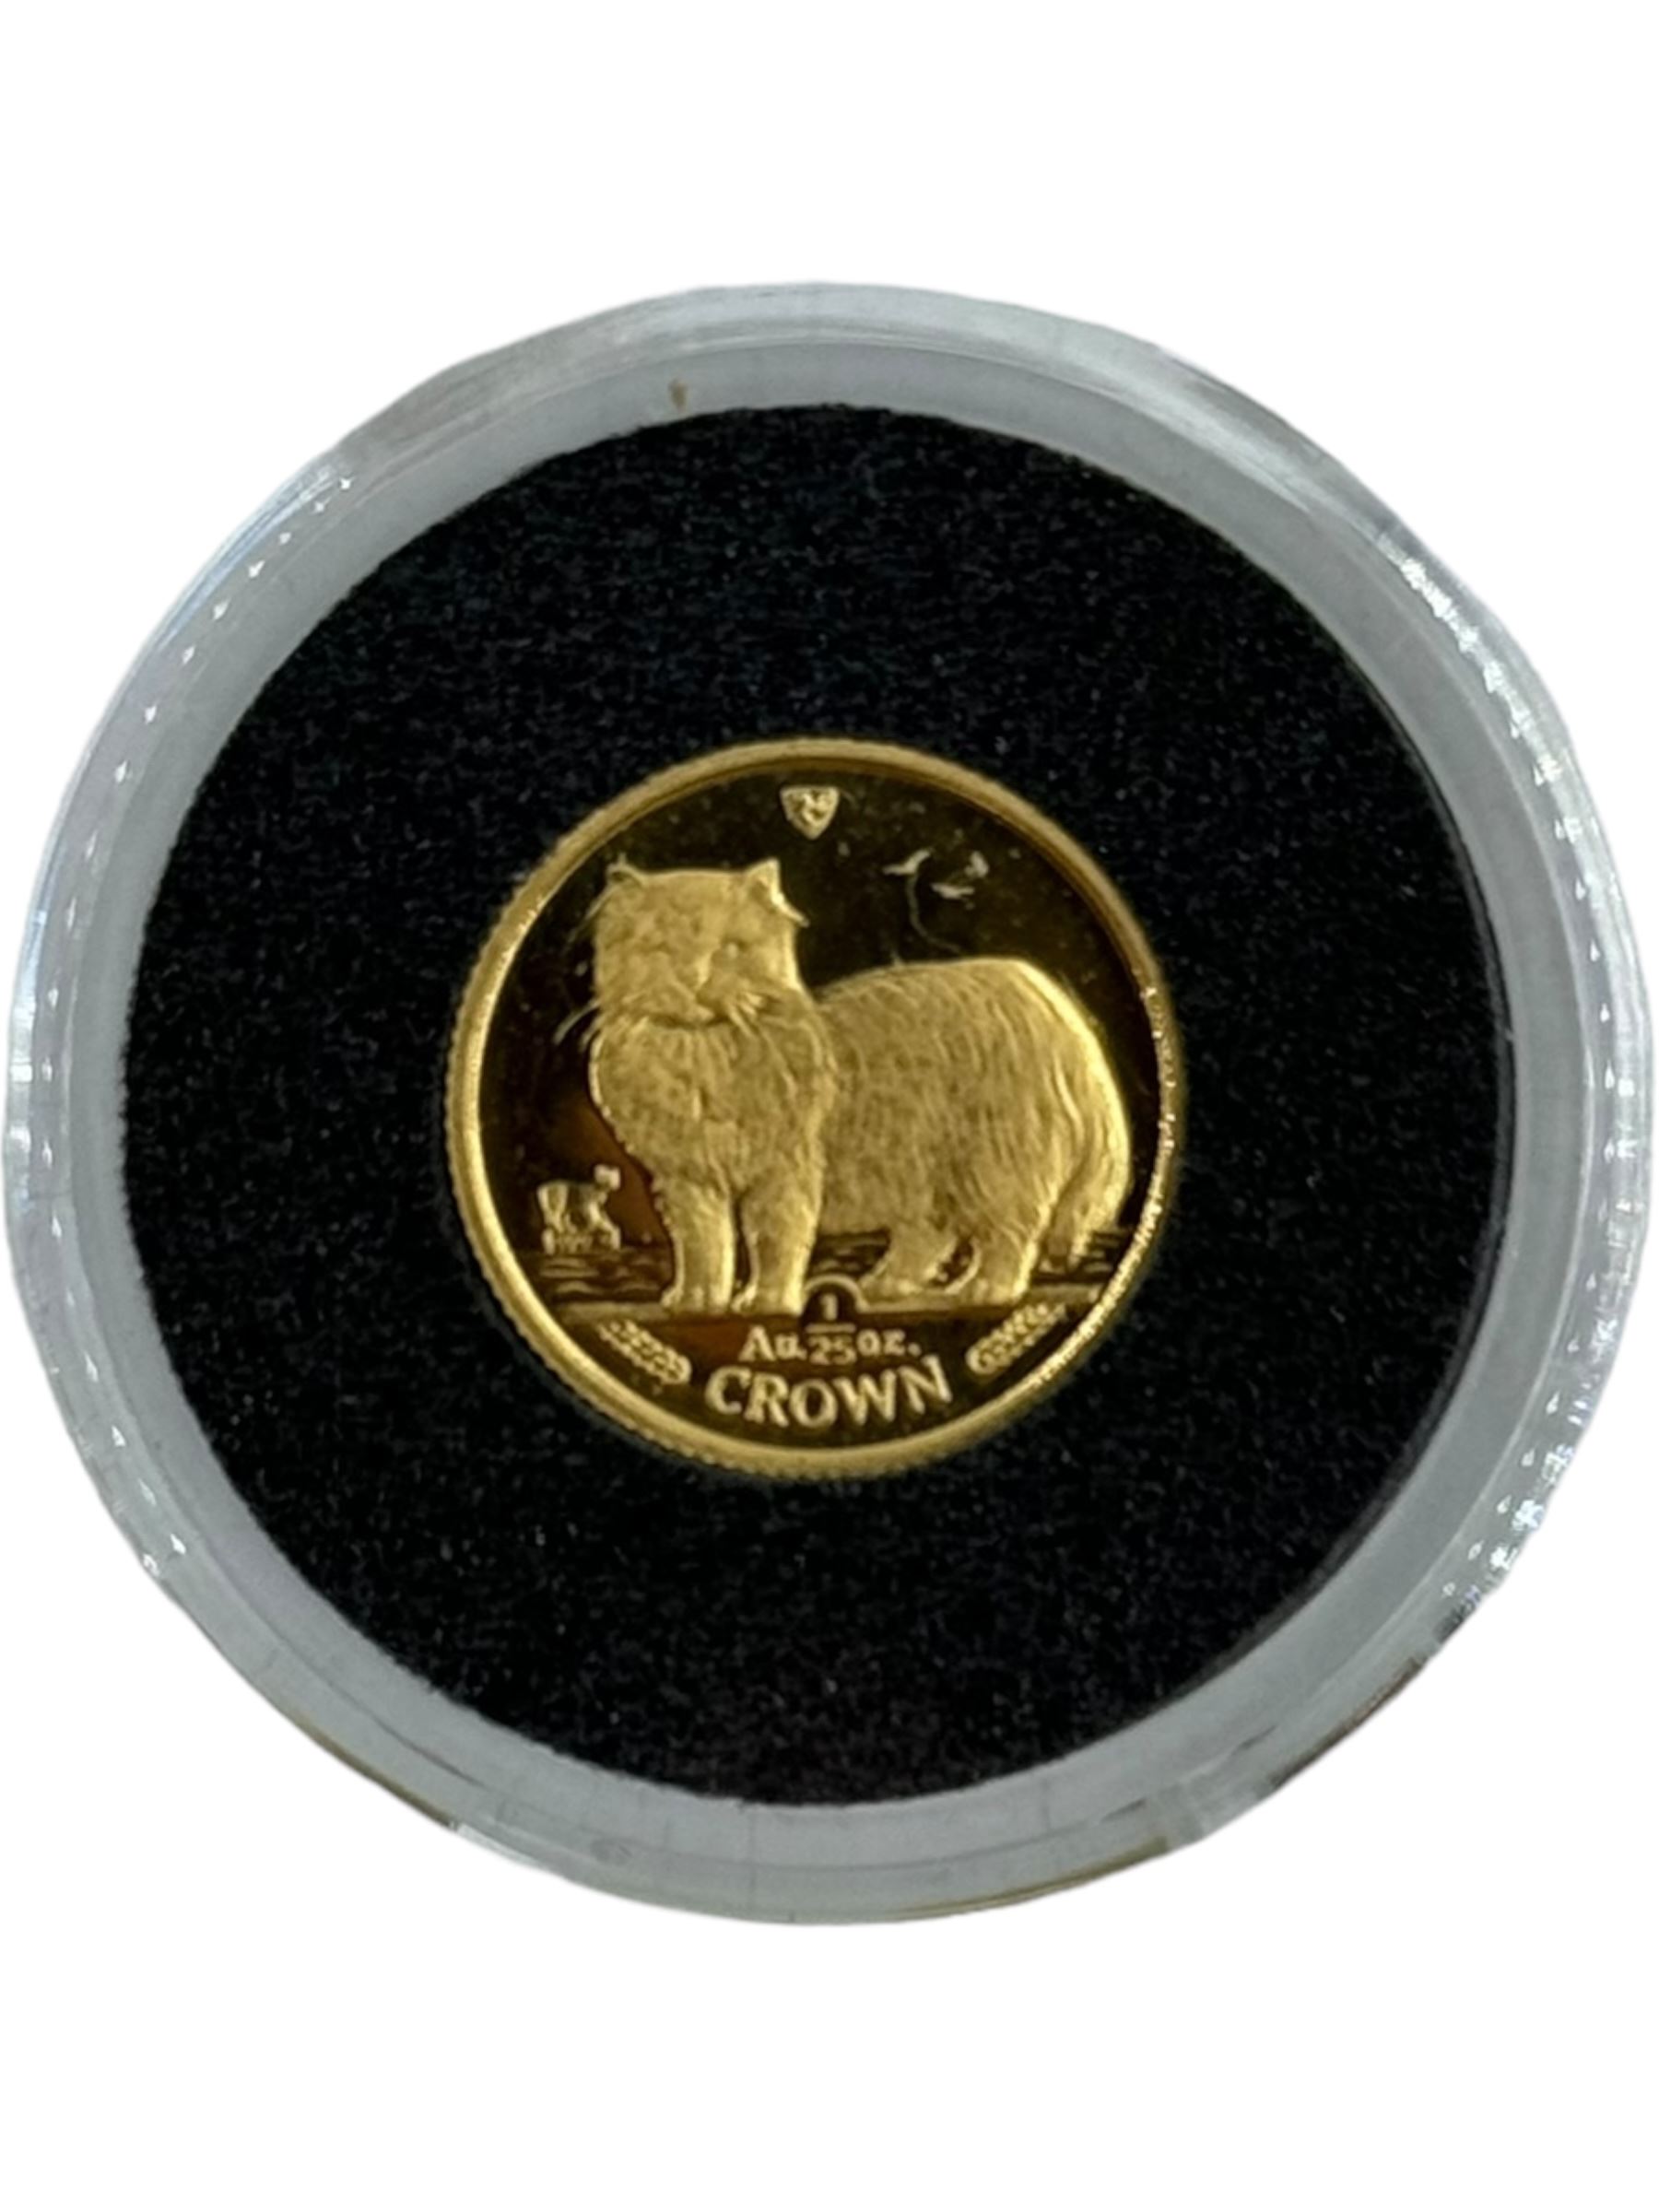 Four one twenty-fifth of an ounce 24 carat gold coins - Image 9 of 9